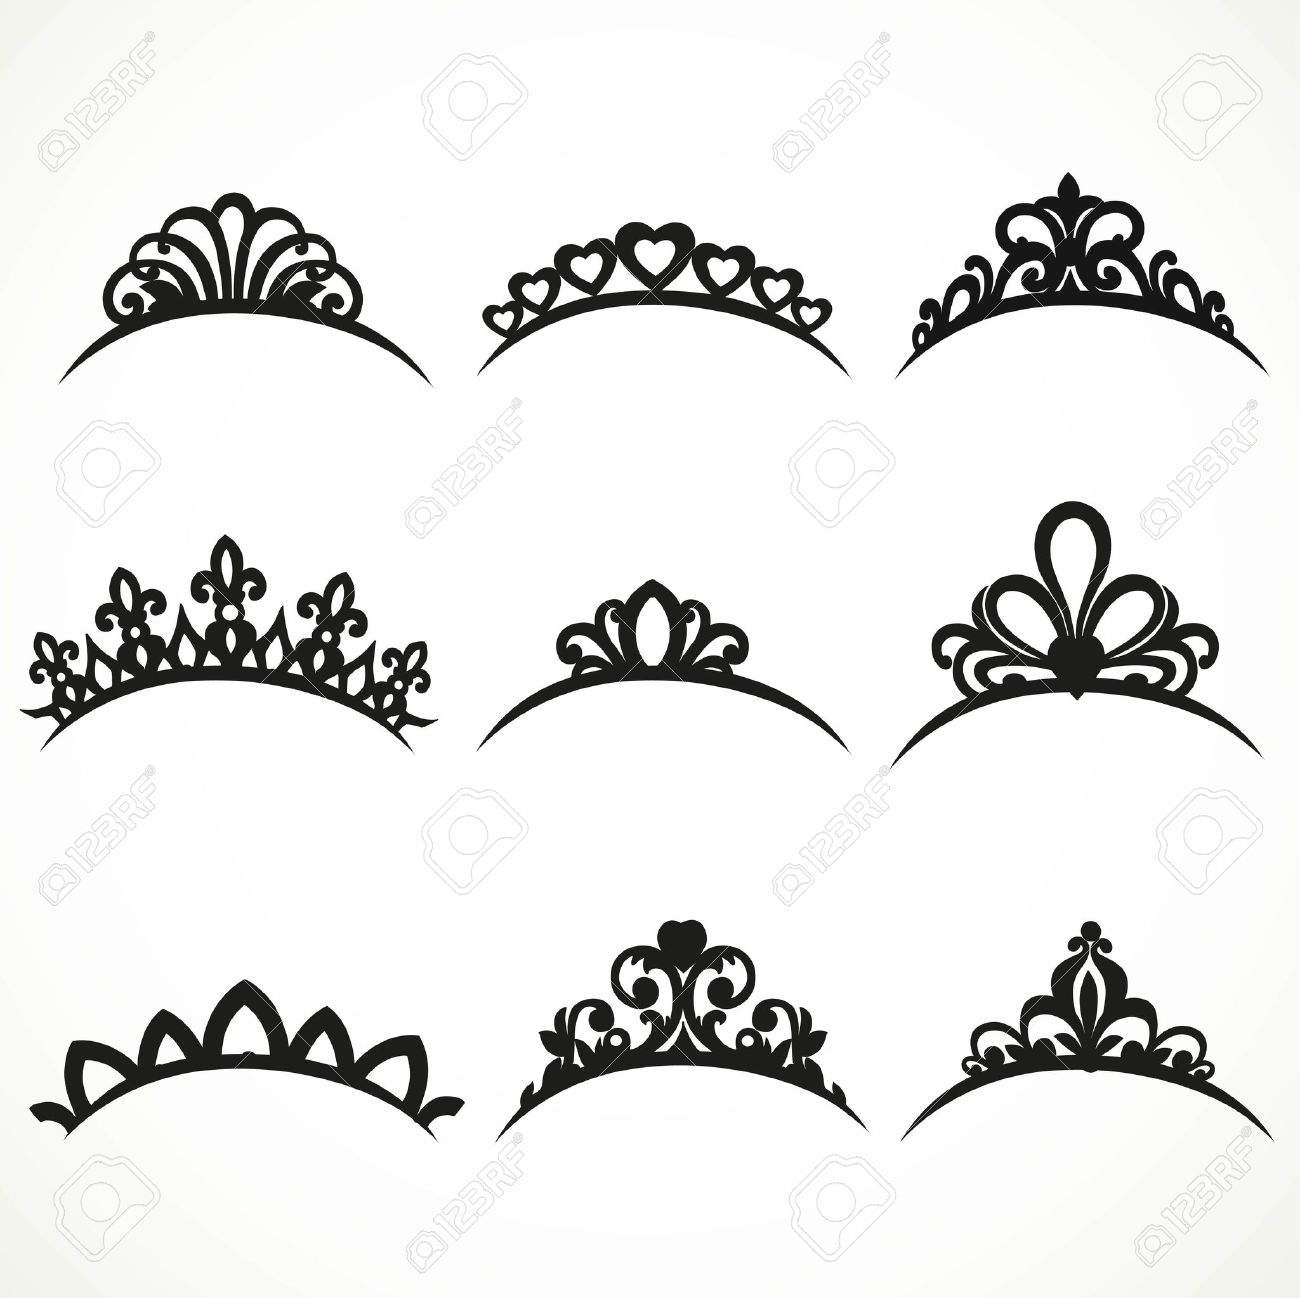 Set of silhouettes of tiaras of various shapes on a white background 1  Illustration